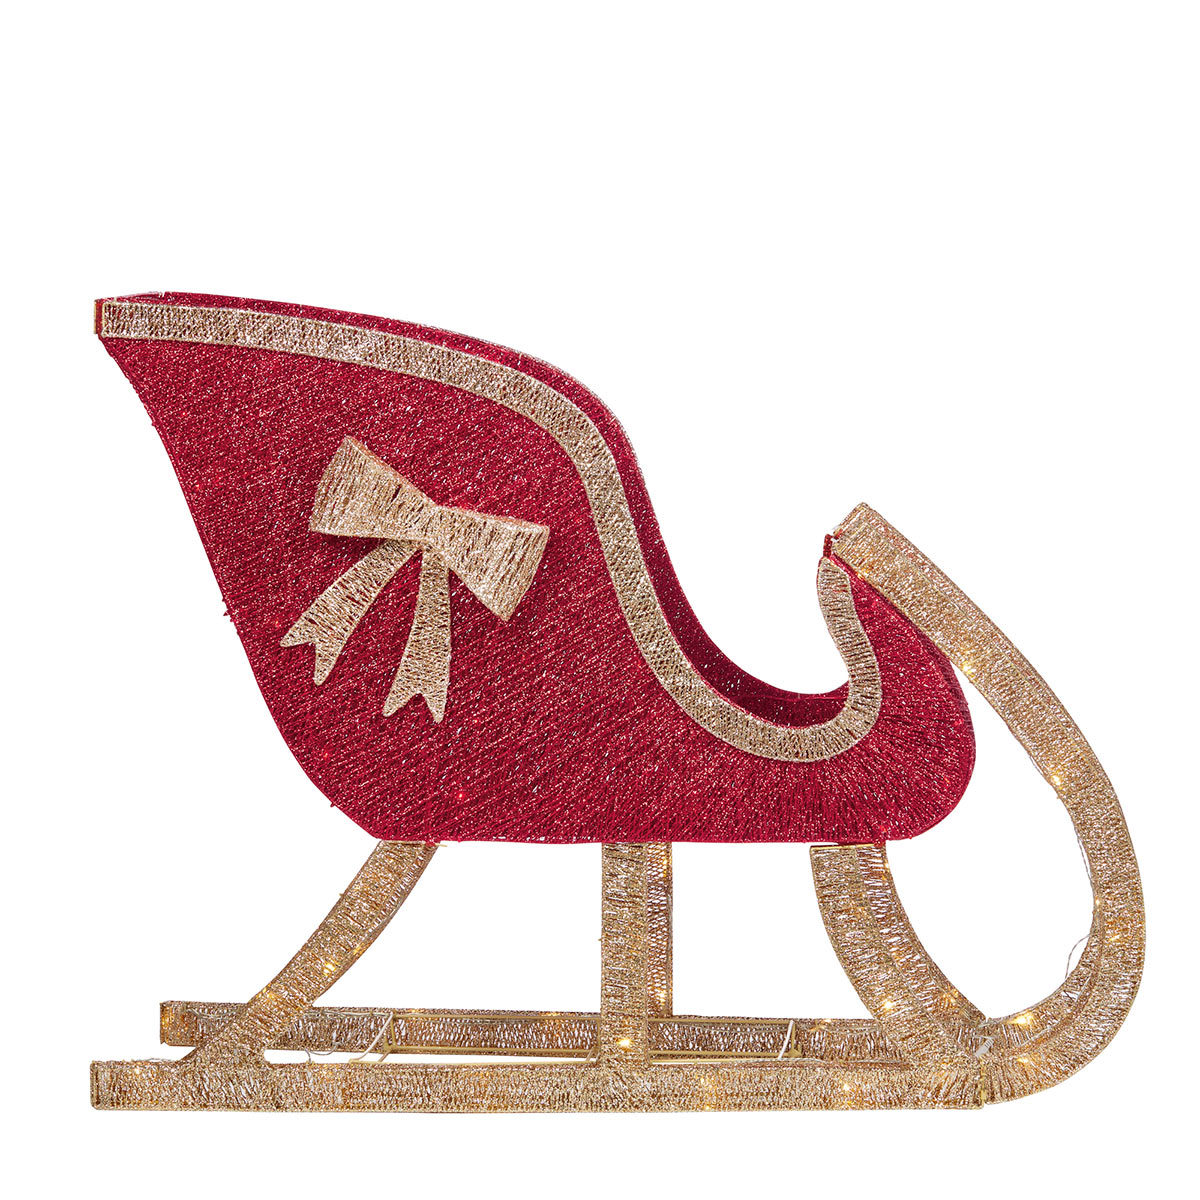 View of a sleigh facing the right on a white background